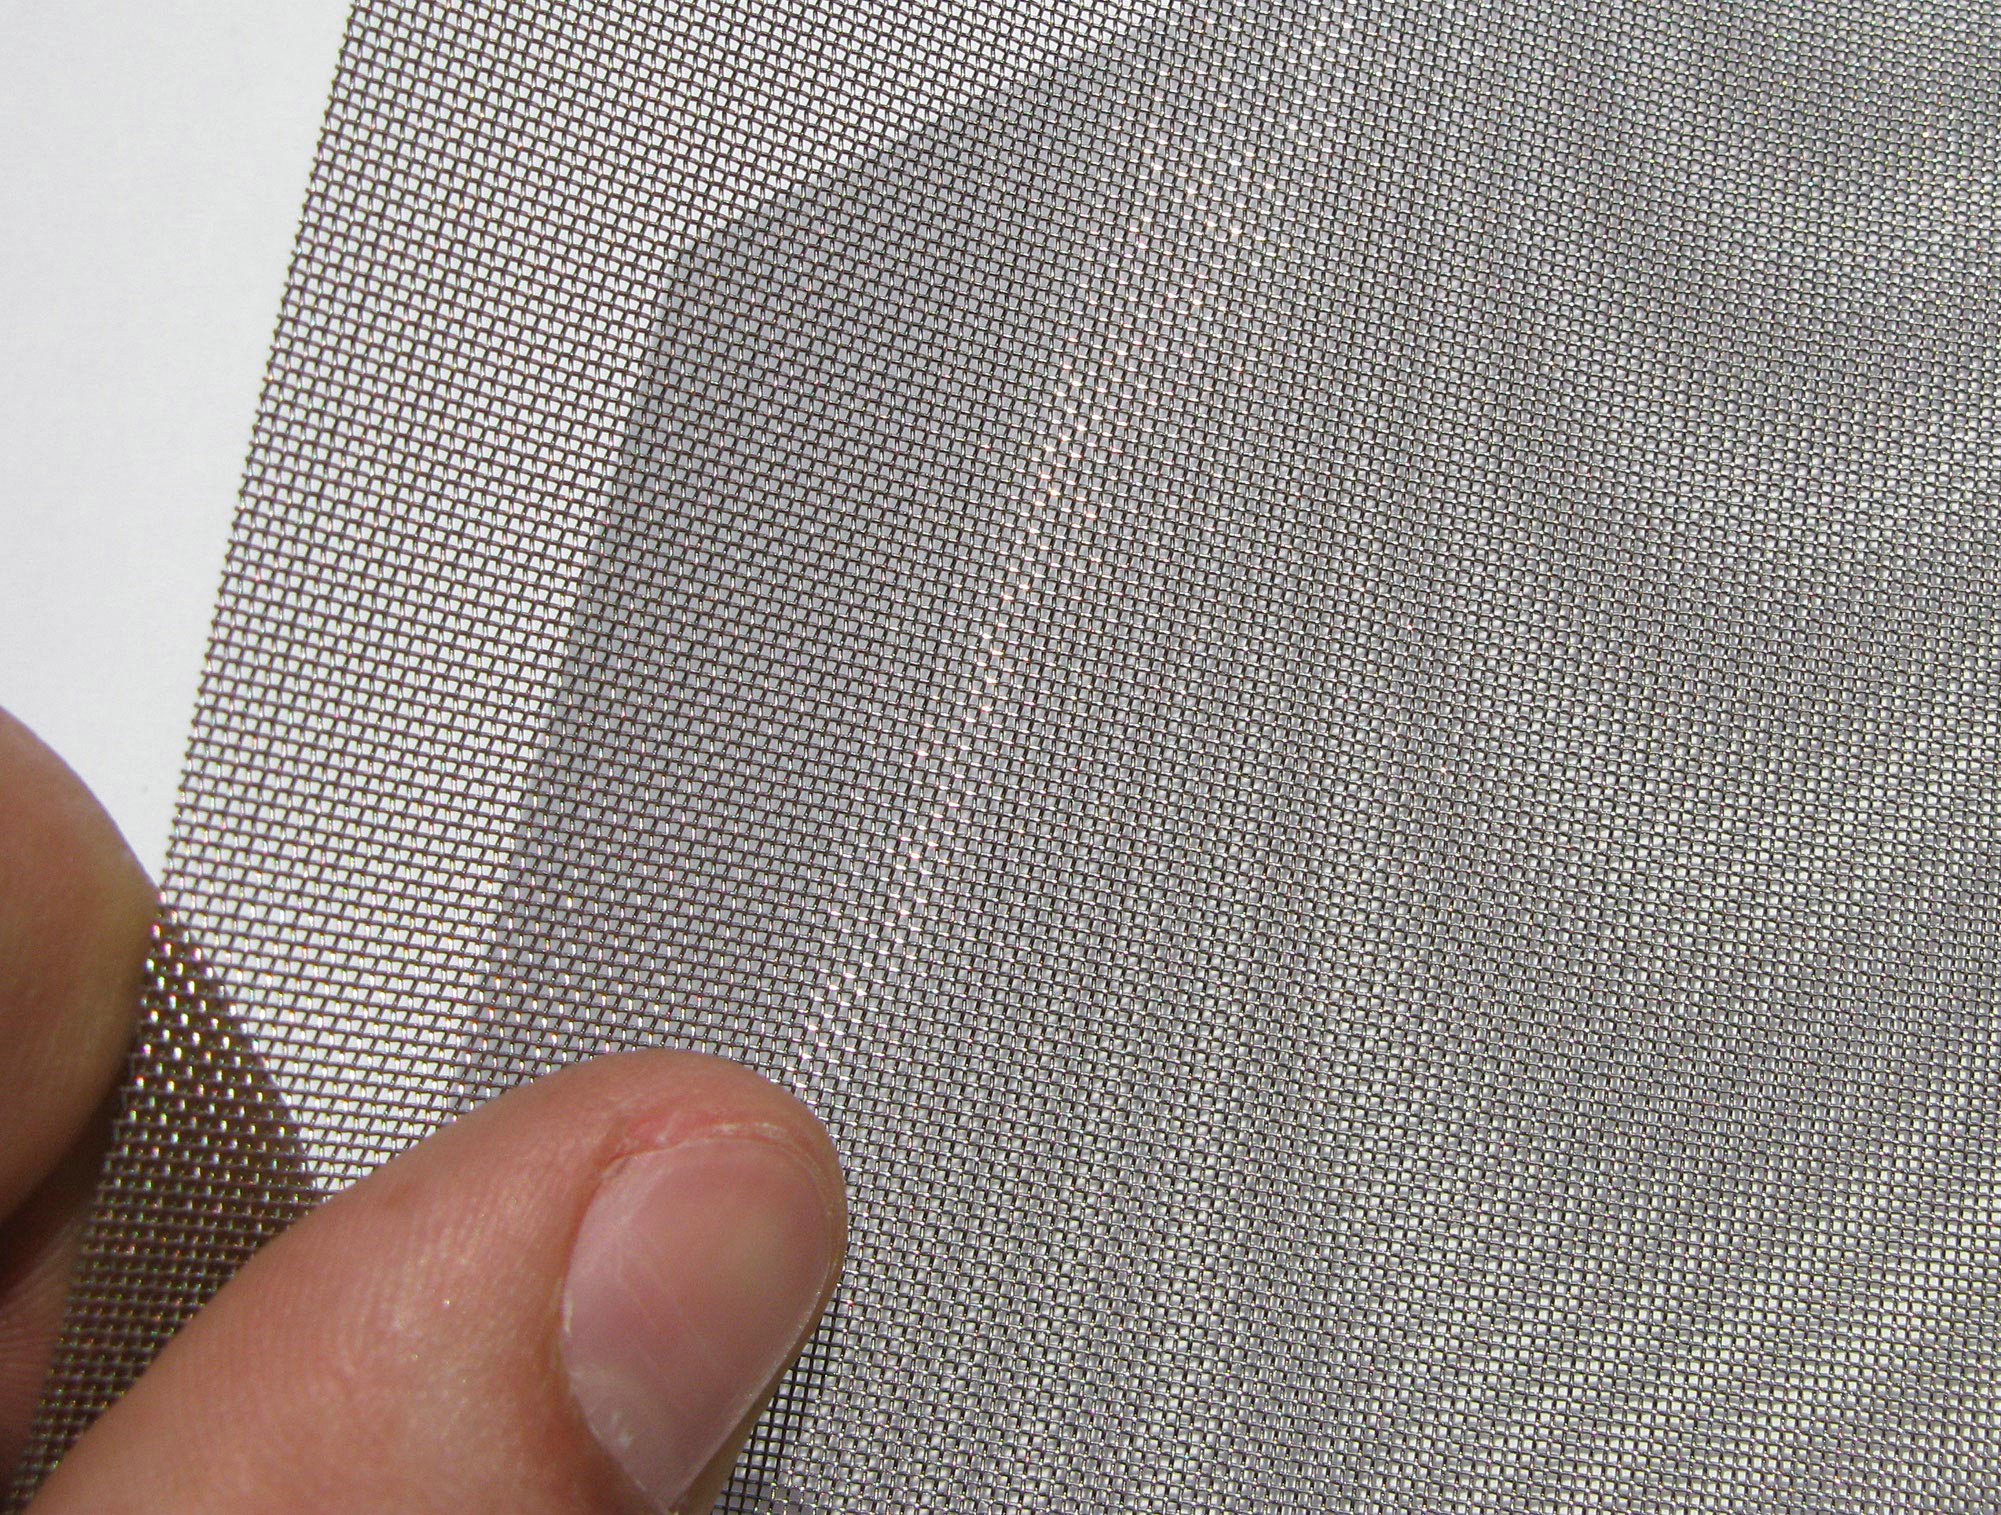 The advantages and uses of metal mesh stainless steel wire filter mesh you do not know